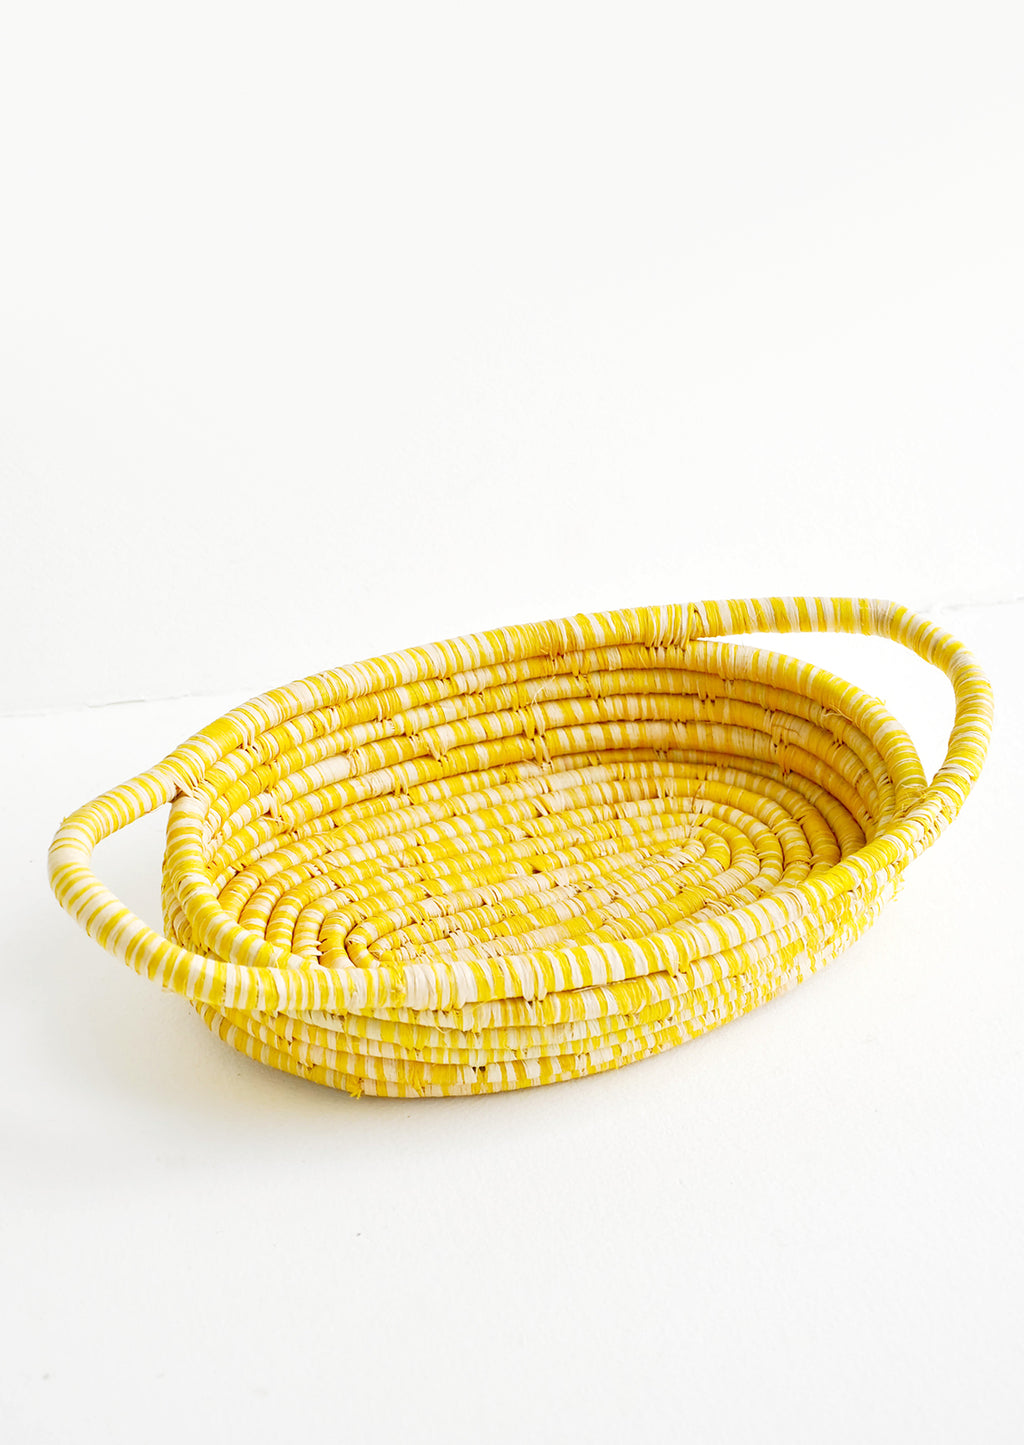 Yellow: Oval Shaped, Shallow Woven Raffia Basket with two side handles in yellow.